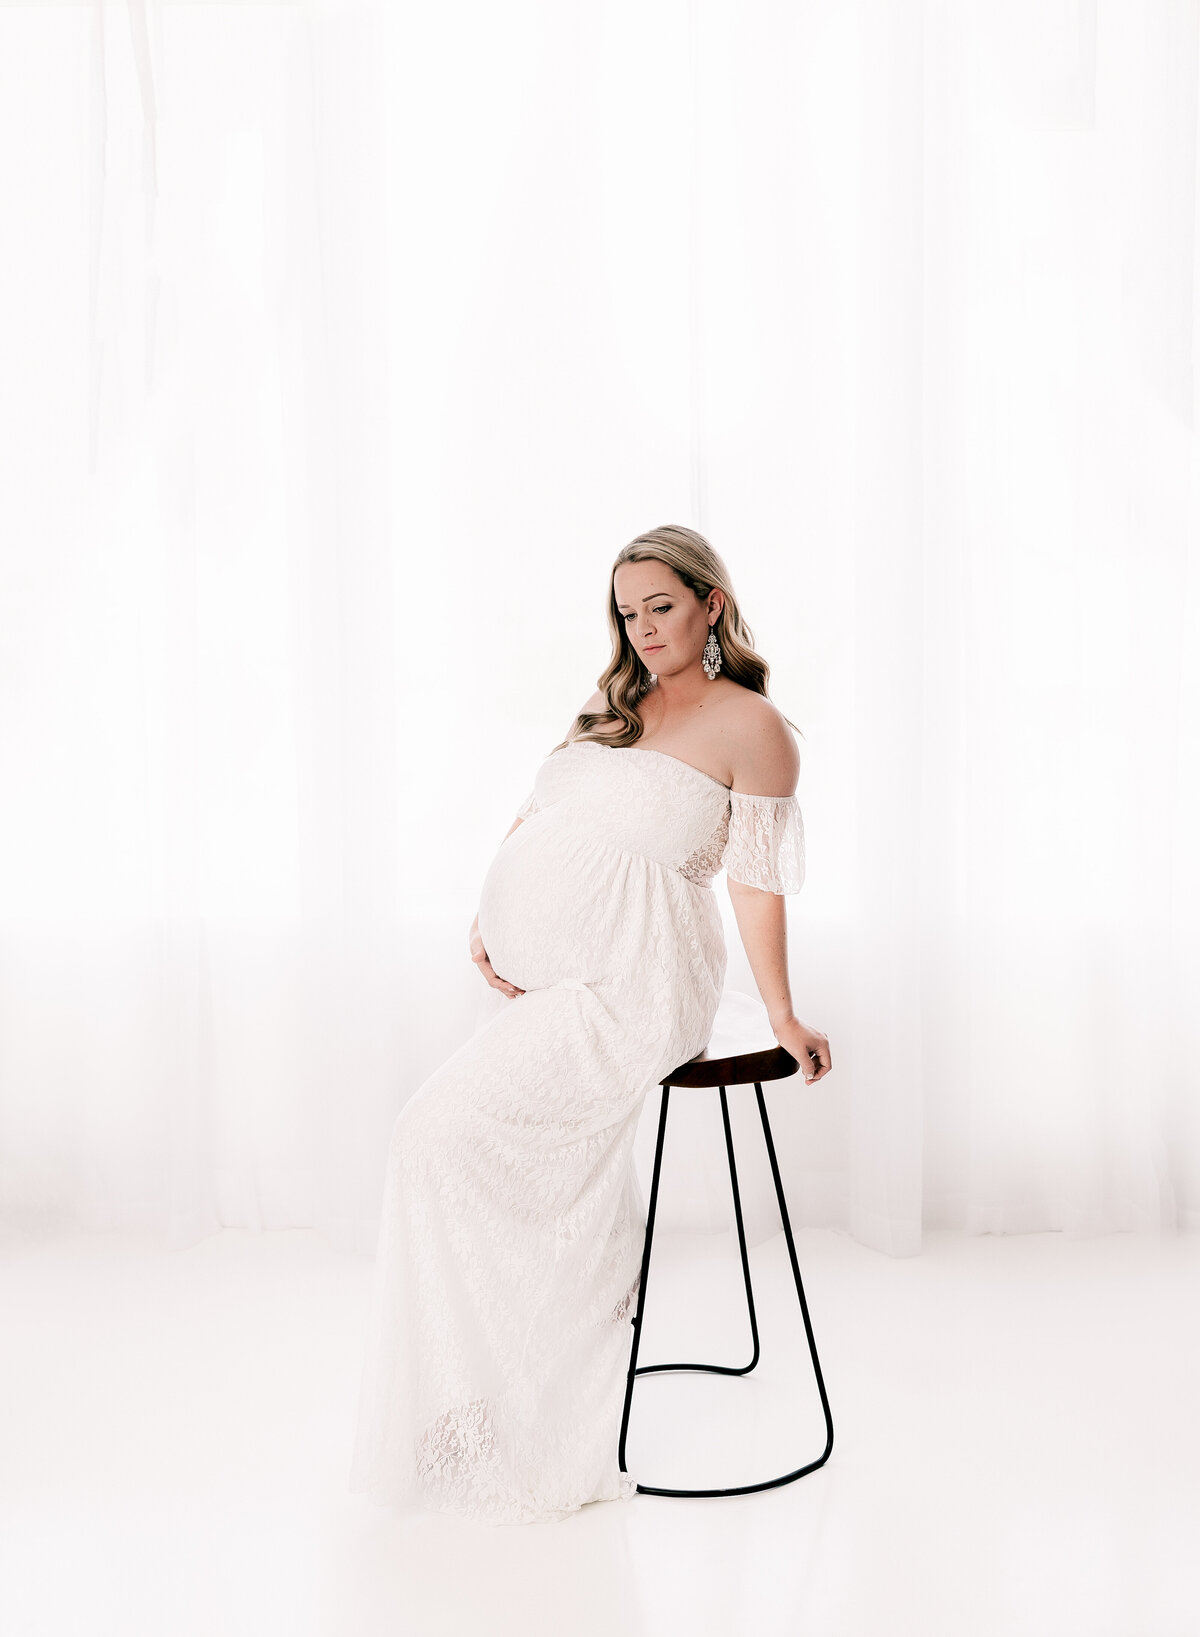 All white maternity session by Diane Owen Photography.